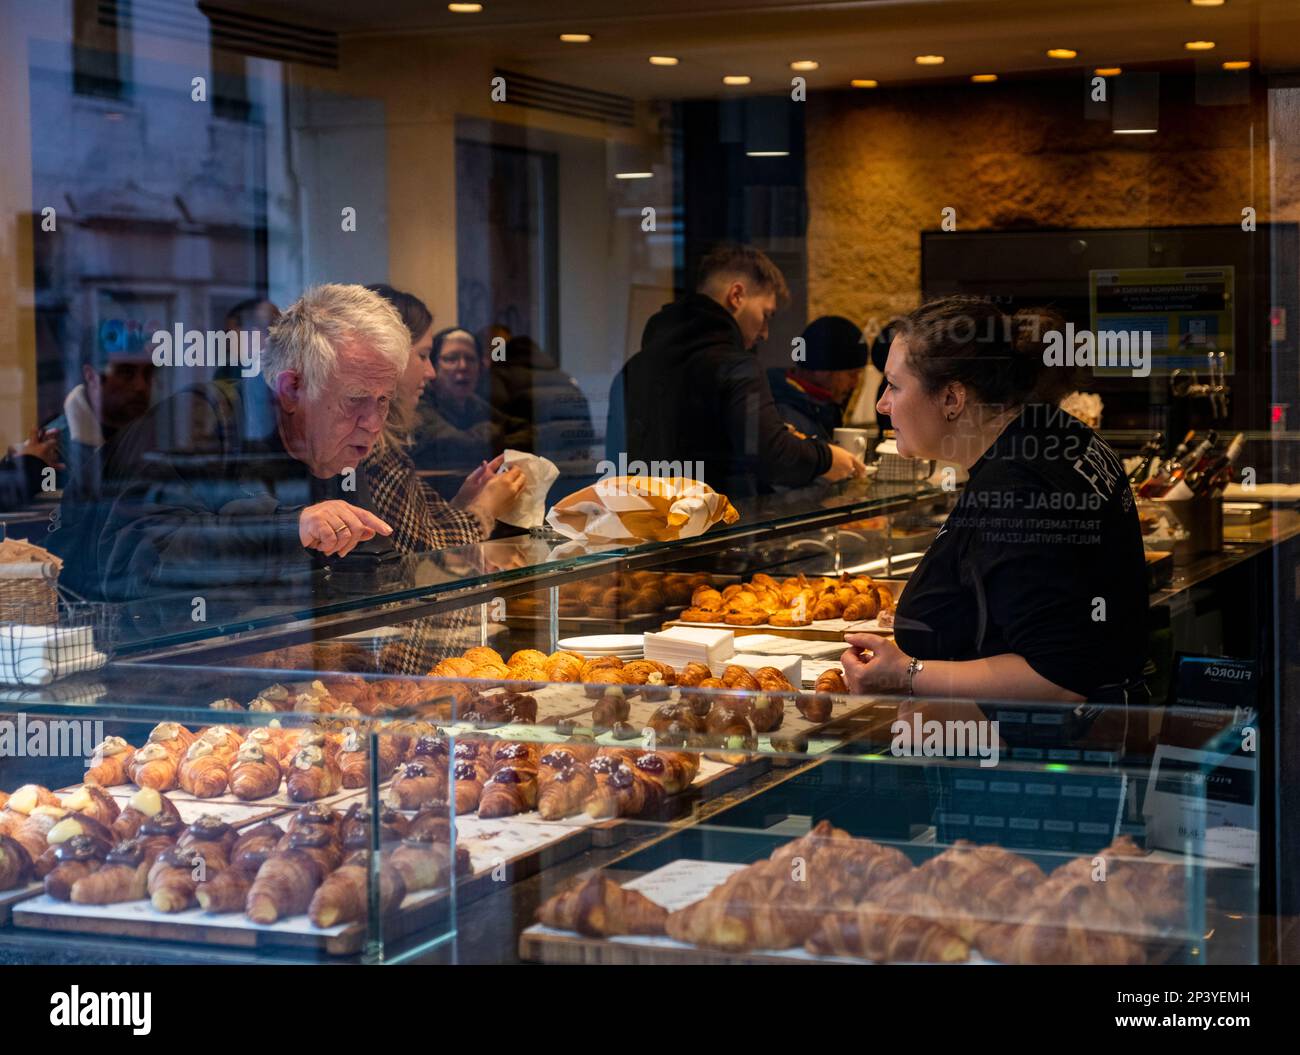 A senior man points to a pastry in a Patisserie shop, Venice, Italy Stock Photo